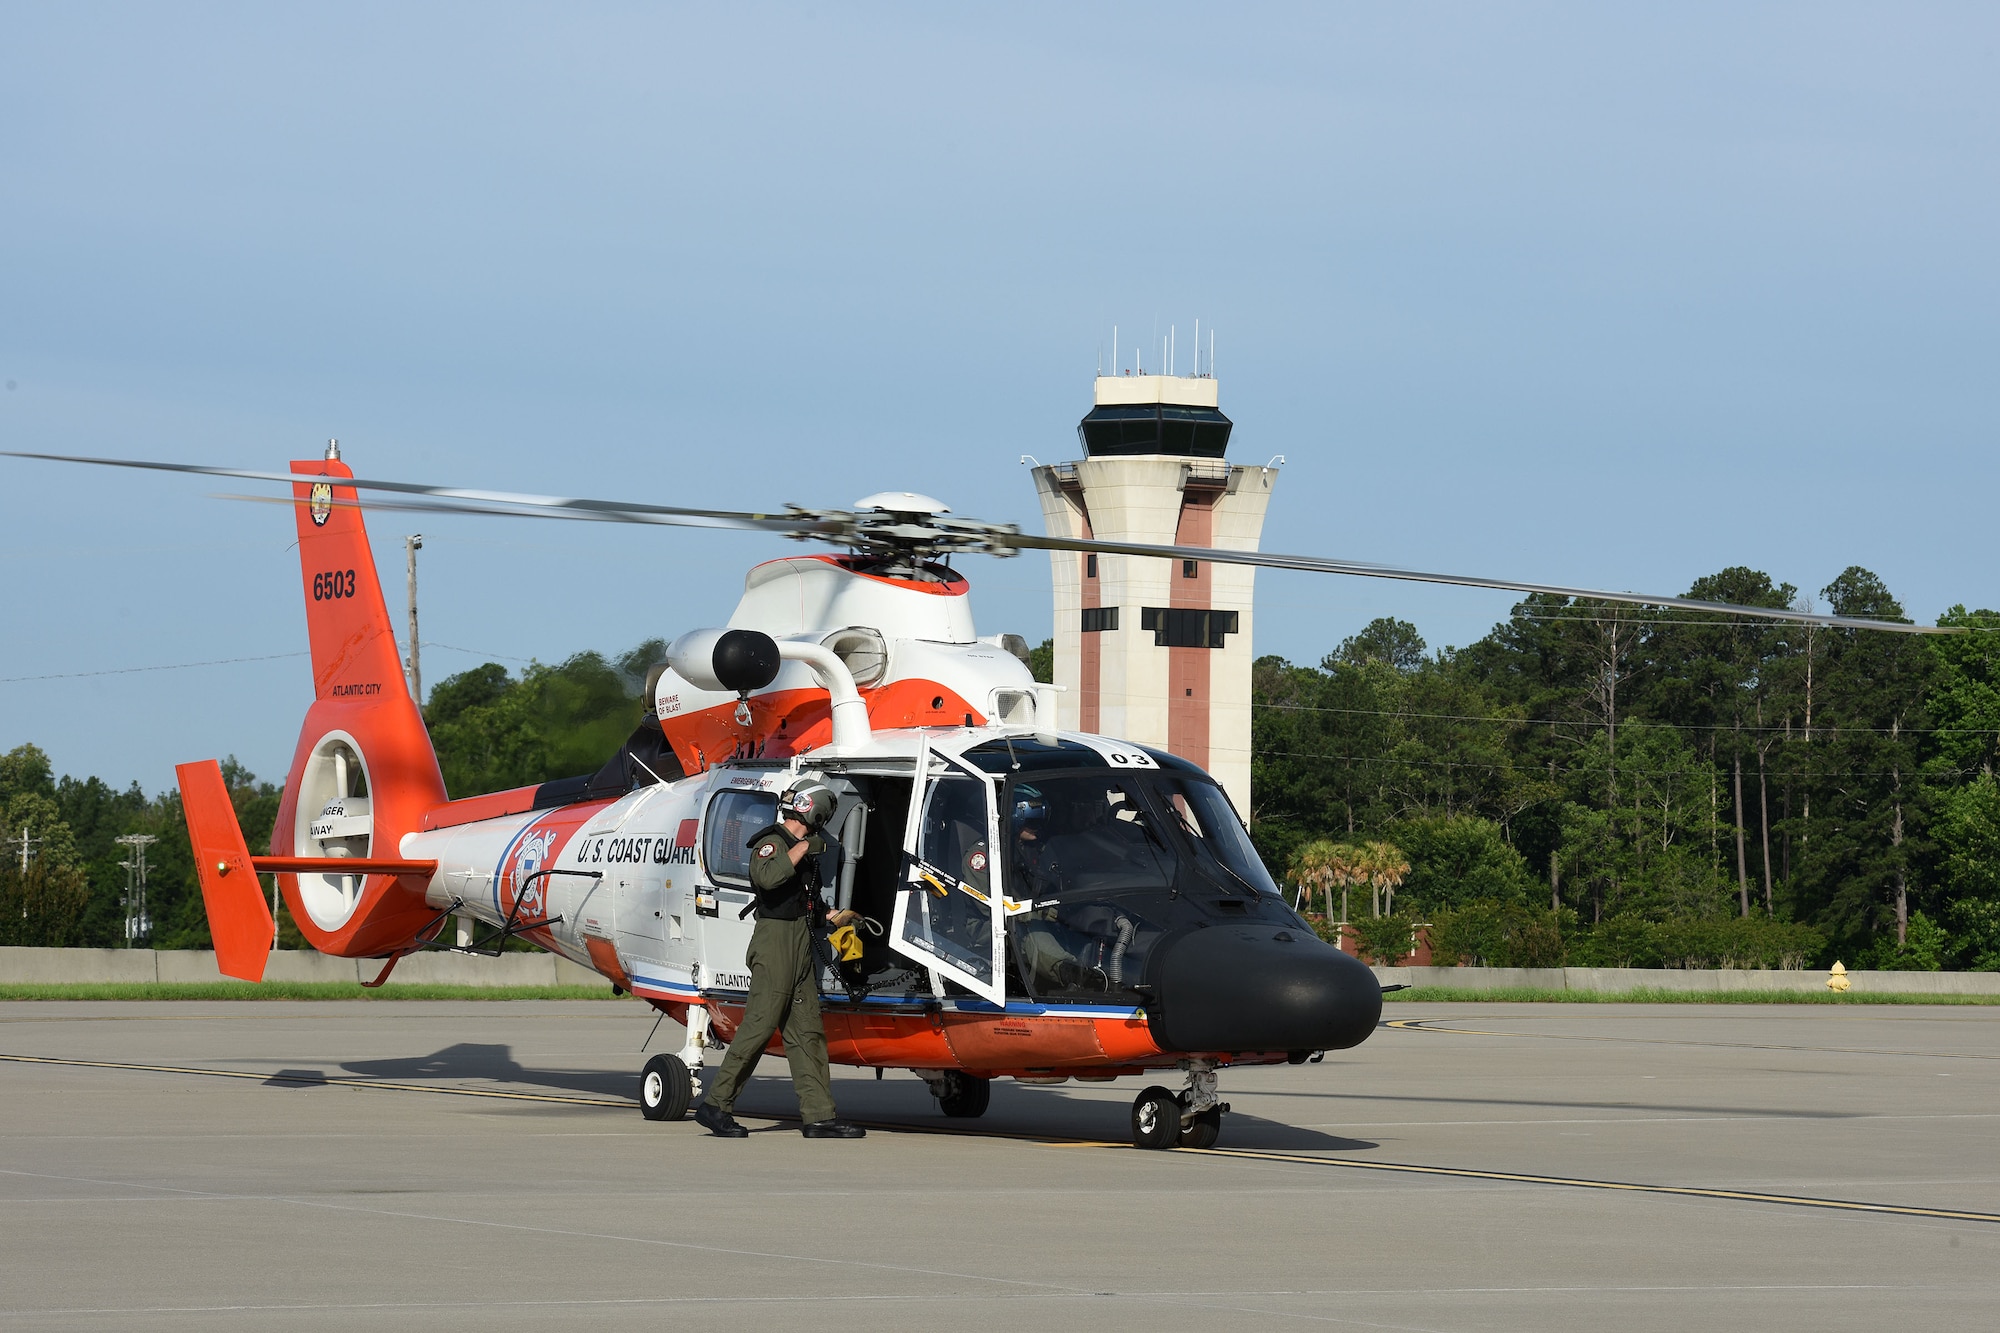 An aircrew member from the U.S. Coast Guard Rotary Wing Air Intercept Squadron Atlantic City, (N.J.), readies for a mission in a  MH-65D Dolphin helicopter during  the Southeast Aerospace Control Alert Conference hosted by the 169th Fighter Wing at McEntire Joint National Guard Base, S.C., June 5-7.The 169th FW hosted the conference in close coordination with the Continental U.S. North American Aerospace Defense Command Region, the Eastern Air Defense Sector and the Federal Aviation Administration. The conference was a total team training initiative to improve homeland defense capabilities by developing techniques with joint forces during small-scale exercises. This conference consisted of South Carolina Air National Guard 169th FW F-16 fighter jets, U.S. Coast Guard Rotary Wing Air Intercept Squadron MH-65D Dolphin helicopters from USCG Air Station Atlantic City and South Carolina Wing Civil Air Patrol aircraft and crews to hone their skills with tactical-level air-intercept procedures. (U.S. Air National Guard photo by Senior Master Sgt. Edward Snyder)